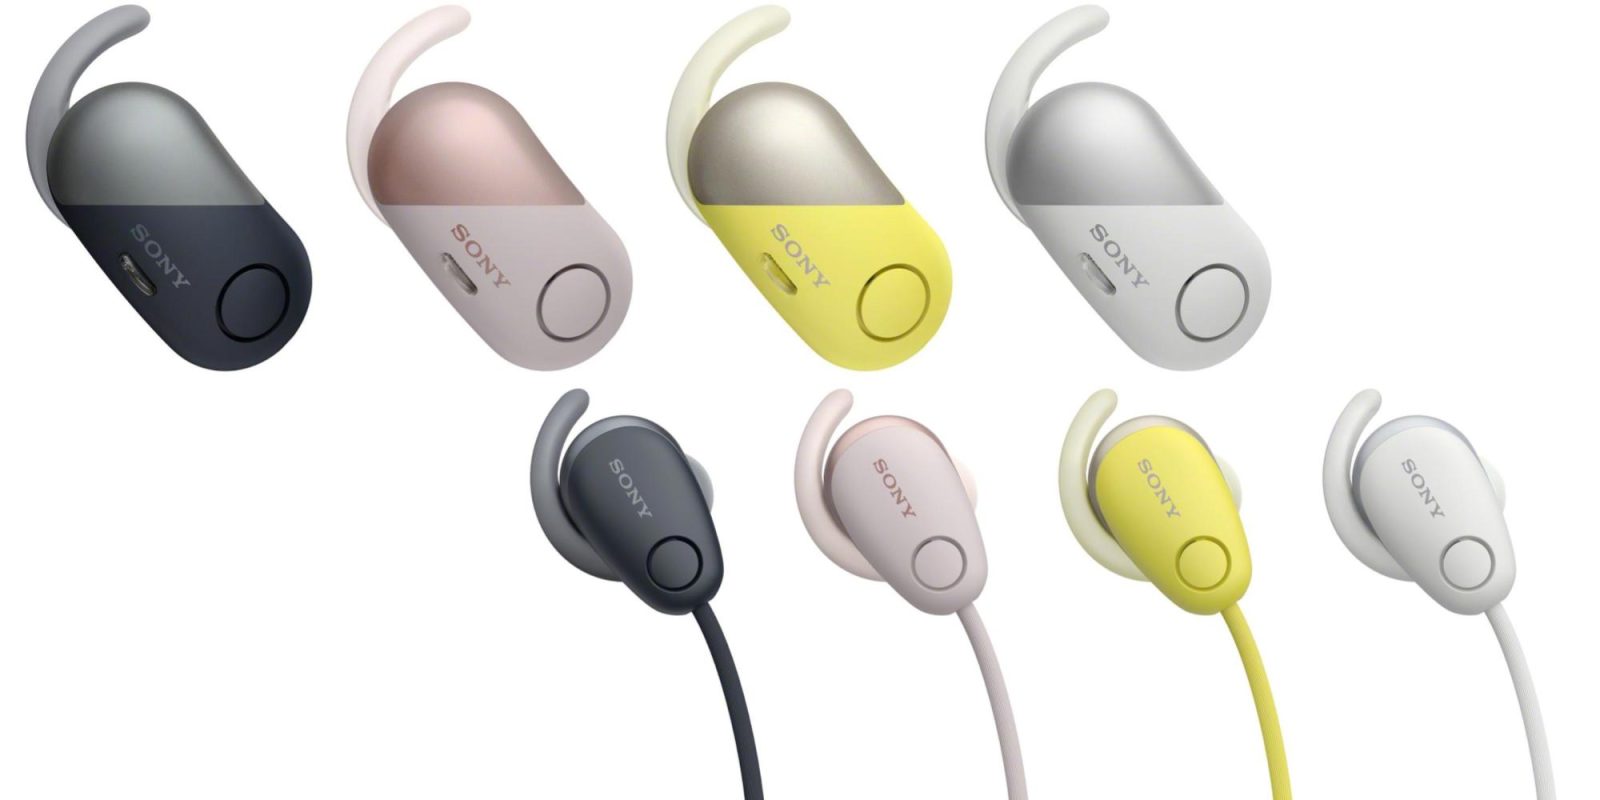 Sony adding Assistant to latest wireless earbuds, neckbuds, & older models  via update - 9to5Google